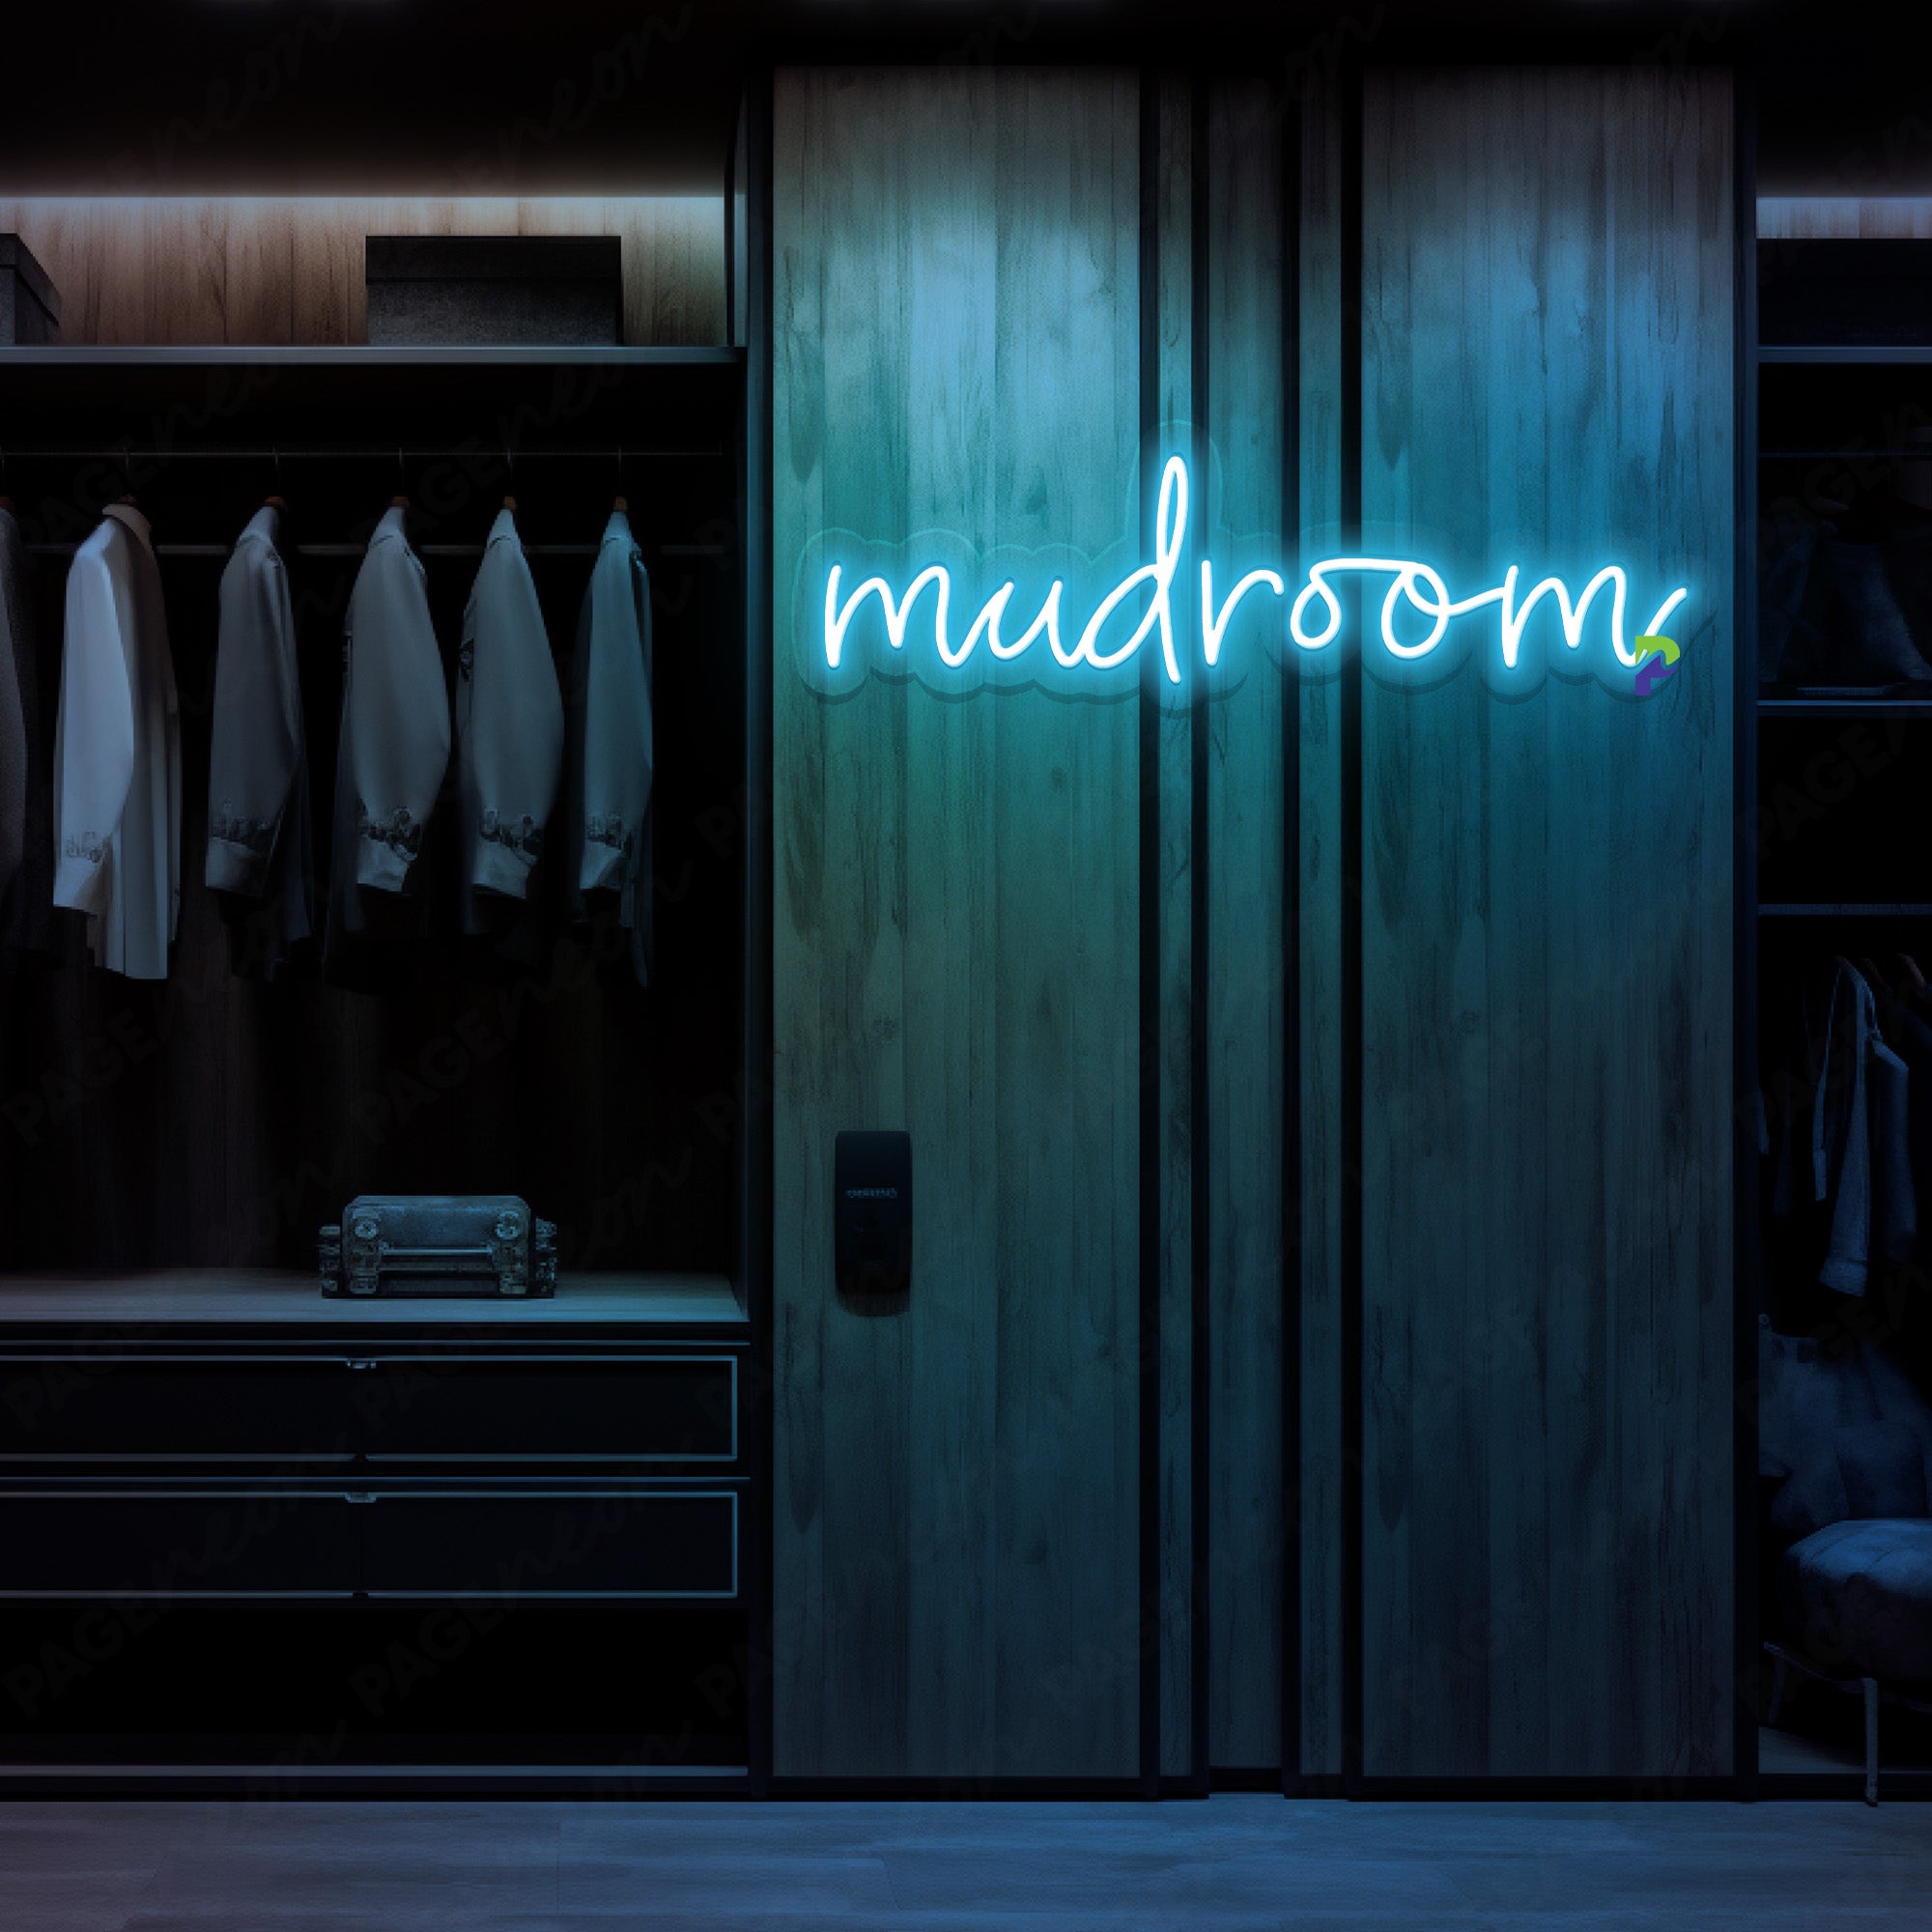 Mudroom Neon Sign Decoration Led Light For Home